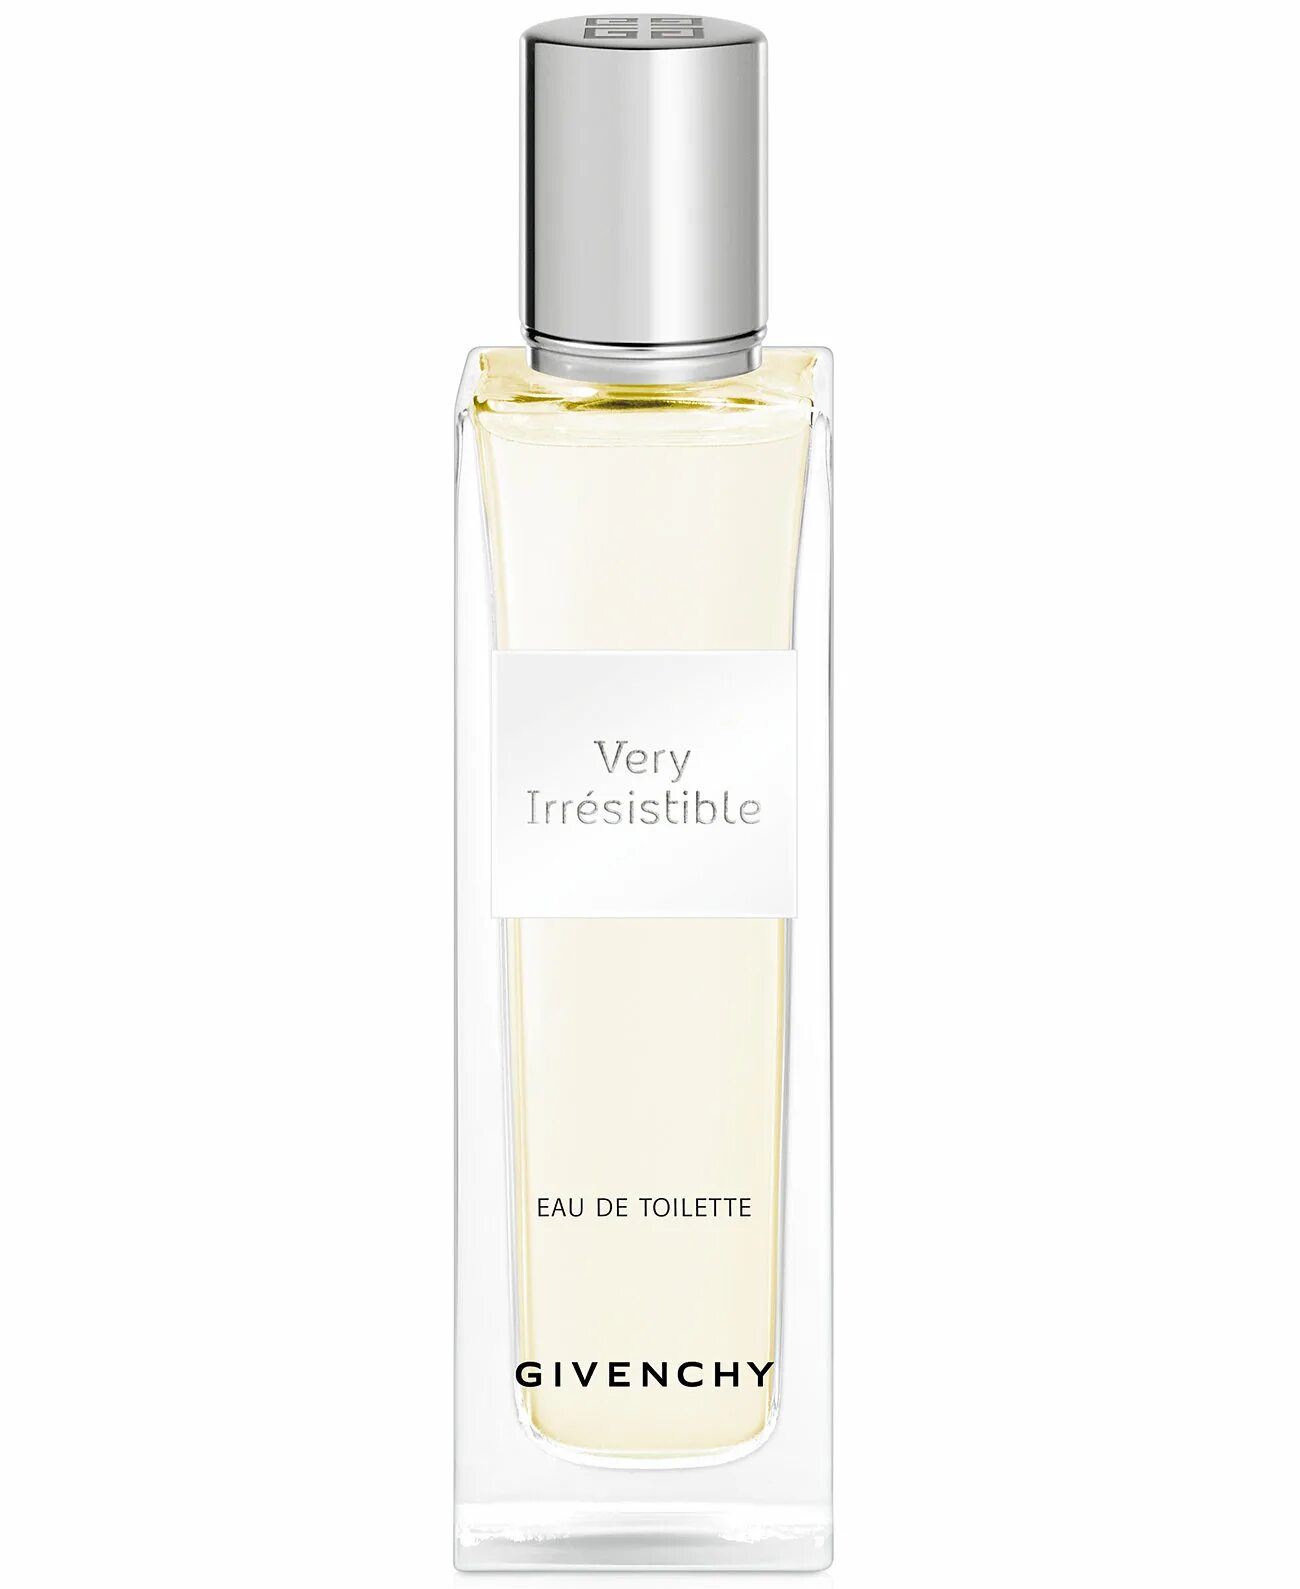 Givenchy Gentleman 15ml. Givenchy irresistible 15мл. Givenchy Gentleman 2017 15 ml. Givenchy irresistible EDT Toilette. Туалетная вода very